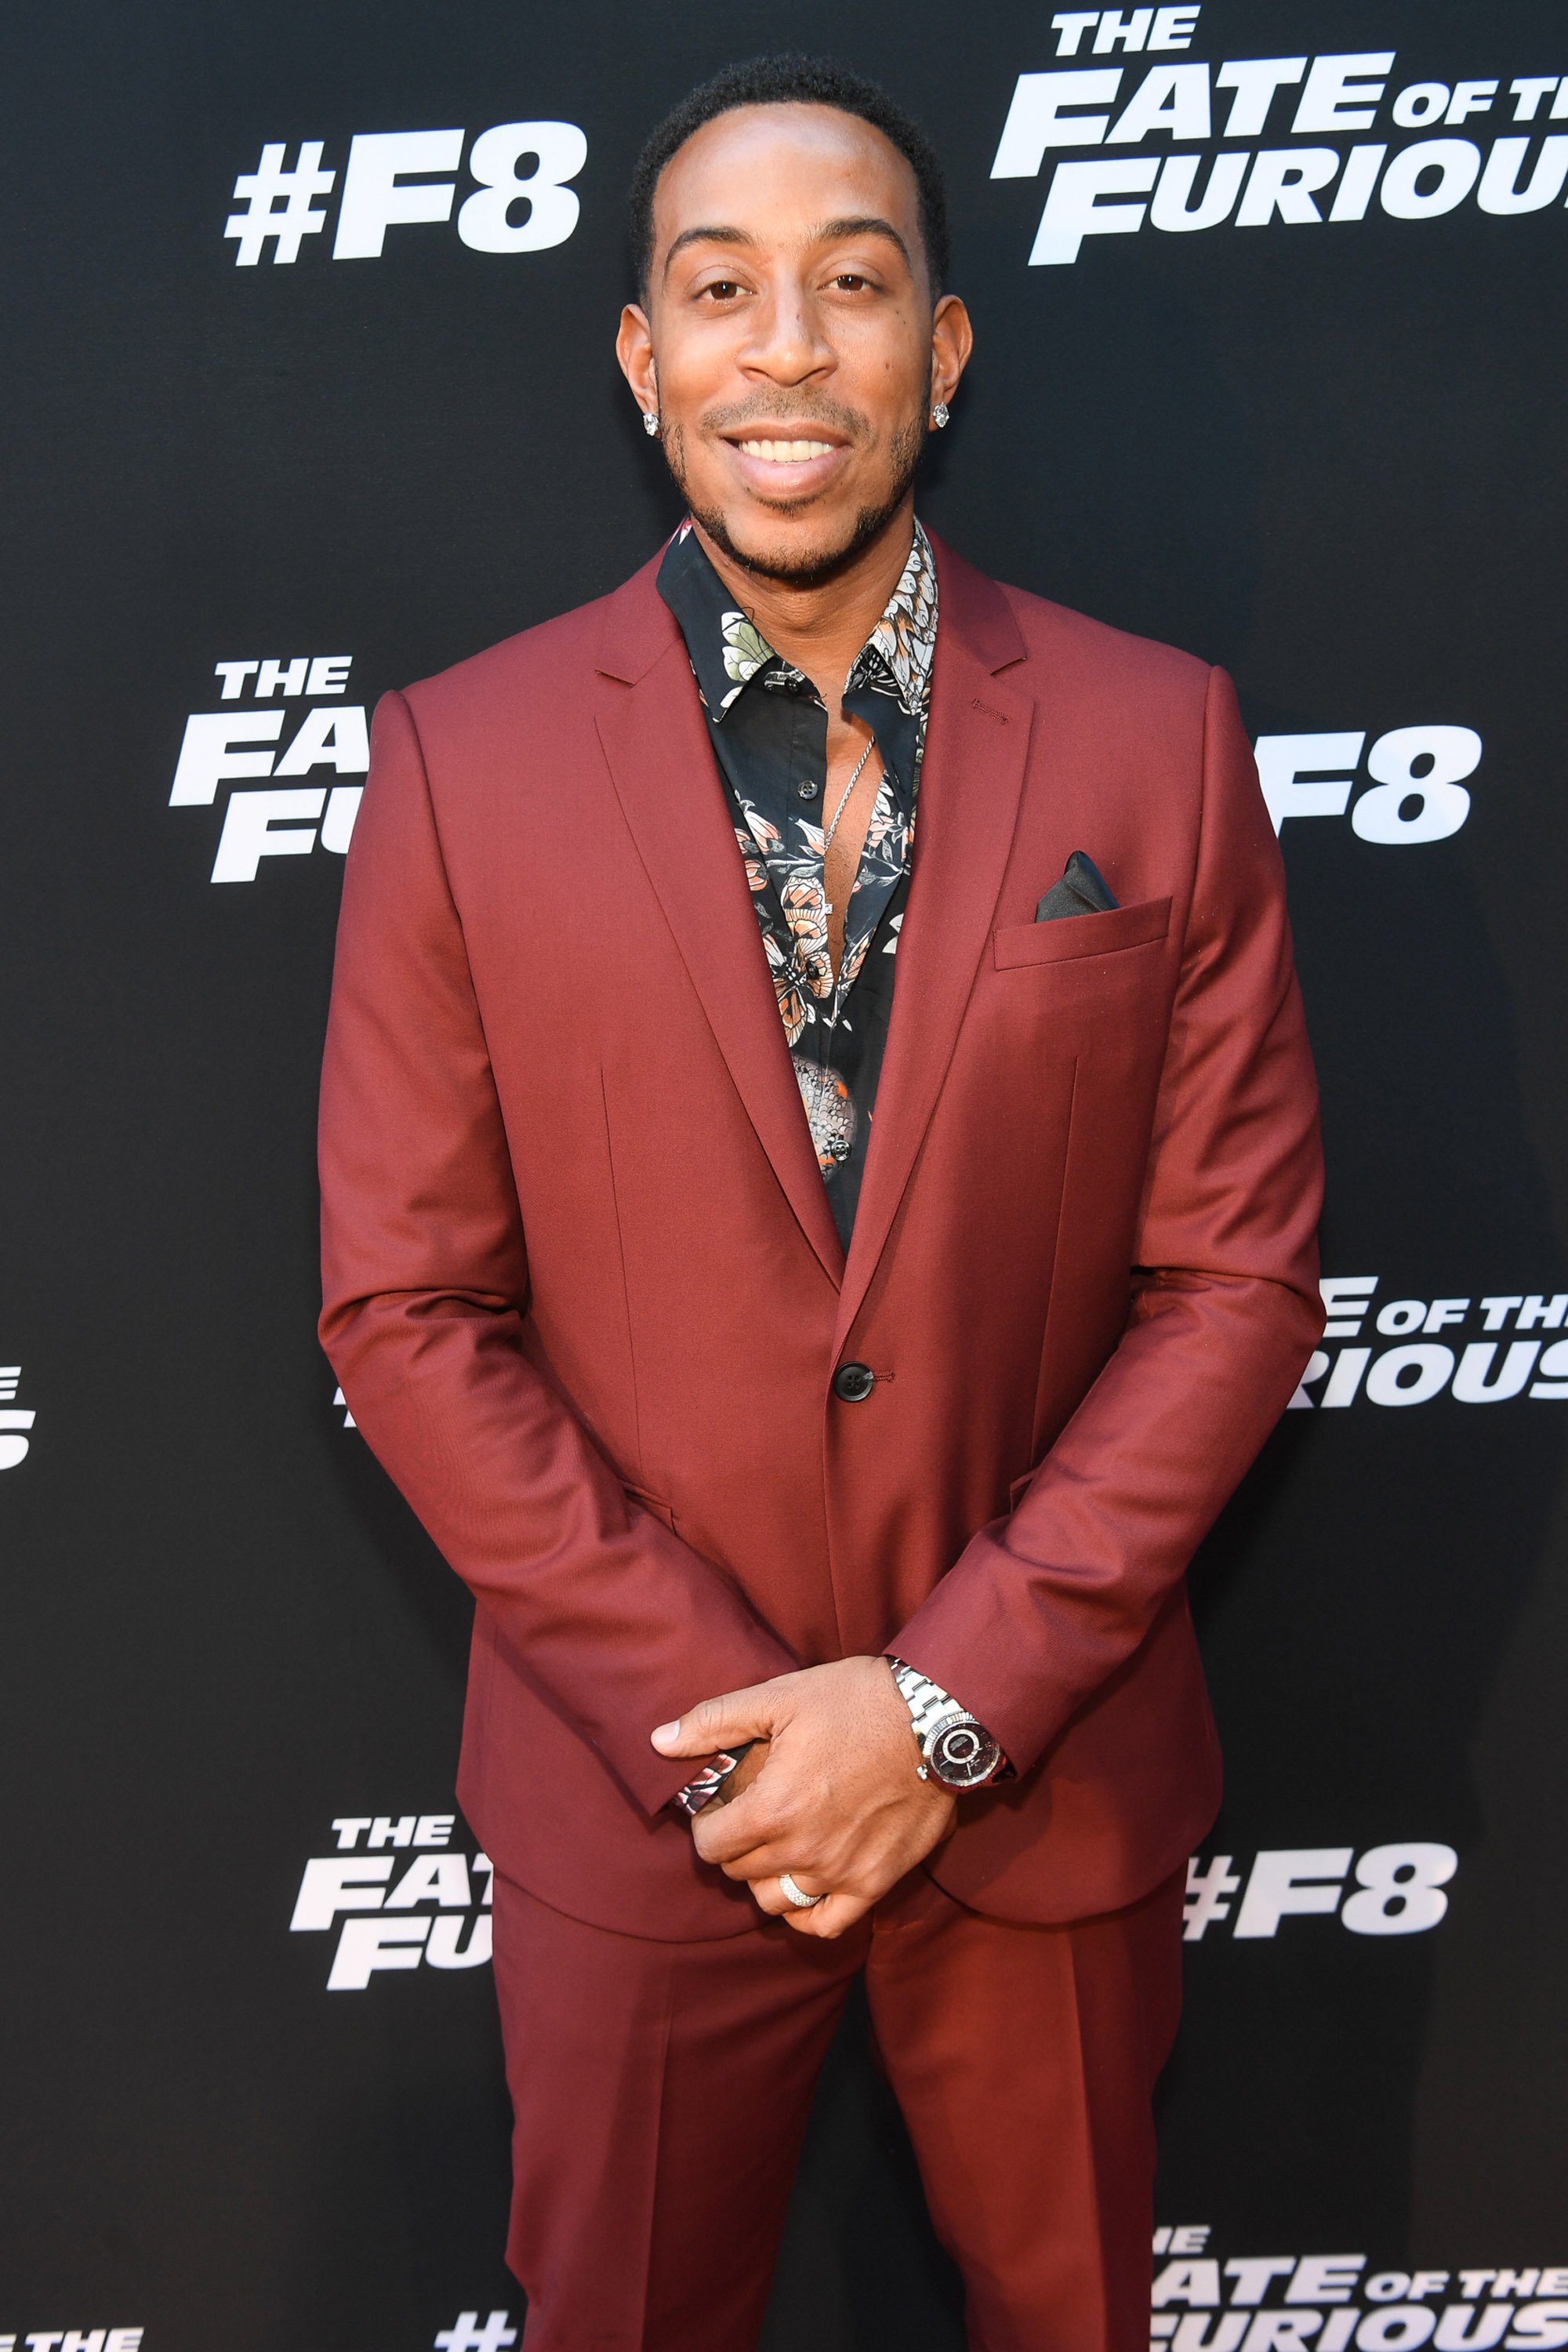 Ludacris at "The Fate Of The Furious" red carpet screening at SCADshow on April 4, 2017 in Atlanta, Georgia. | Photo: Getty Images